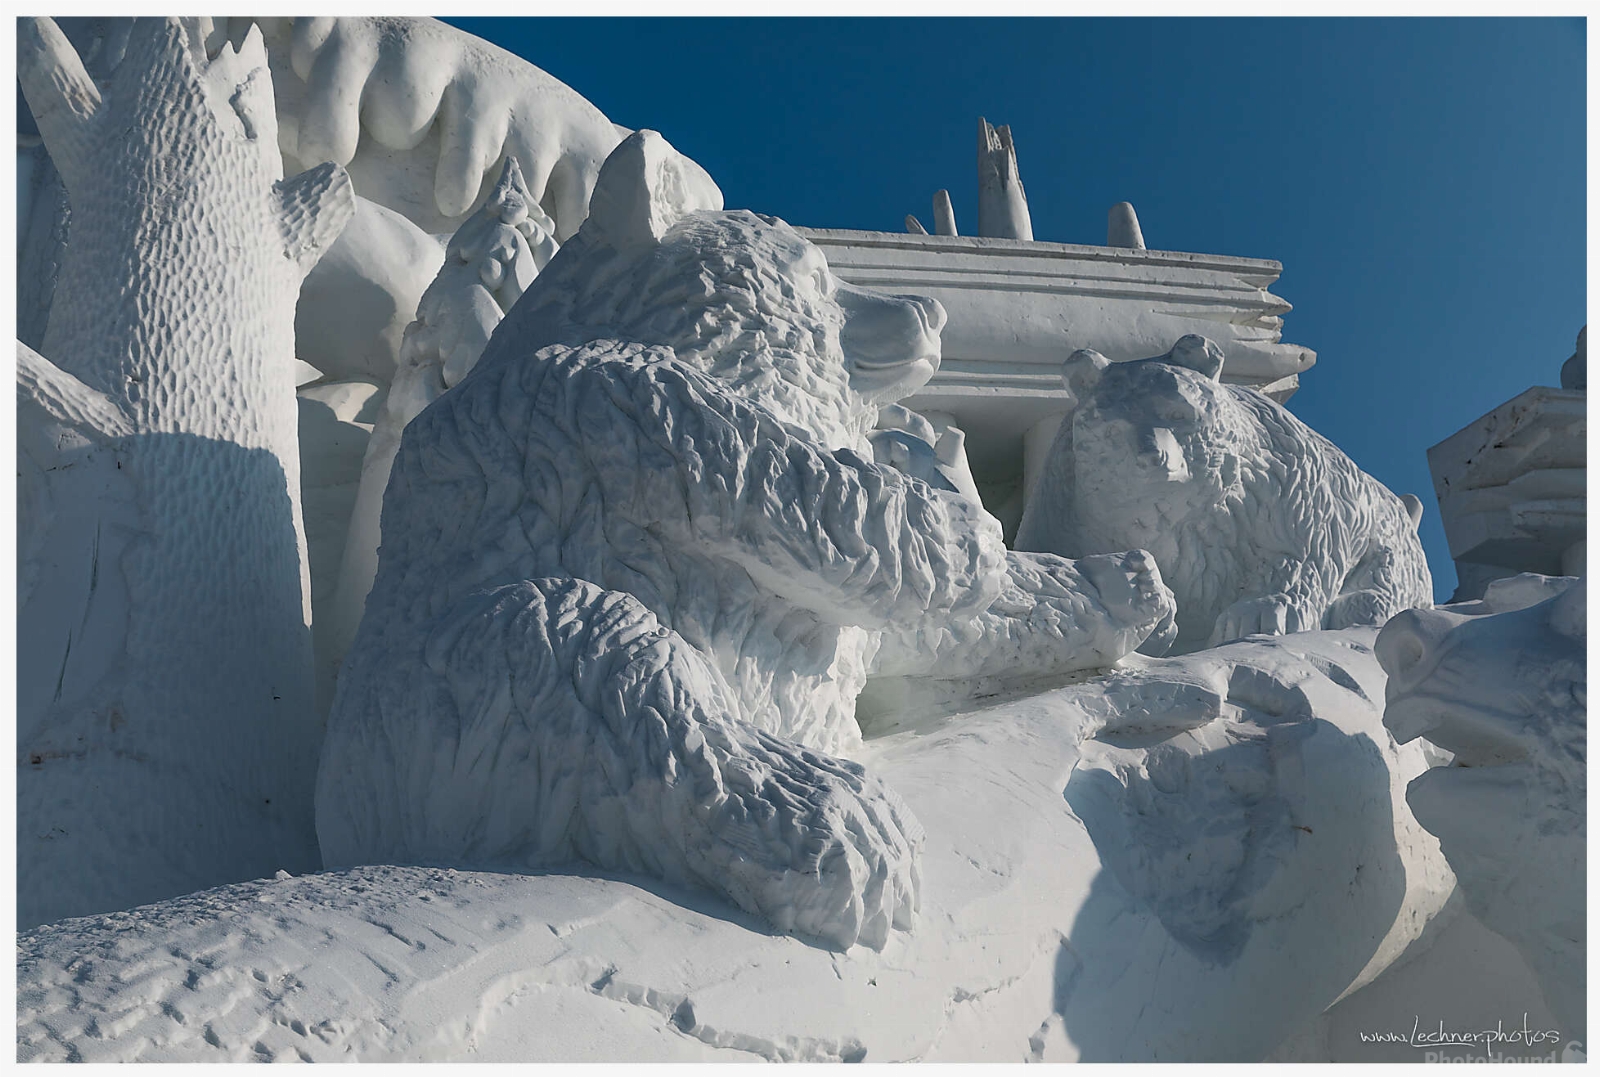 Image of Harbin Ice & Snow Sculpture Park by Florian Lechner